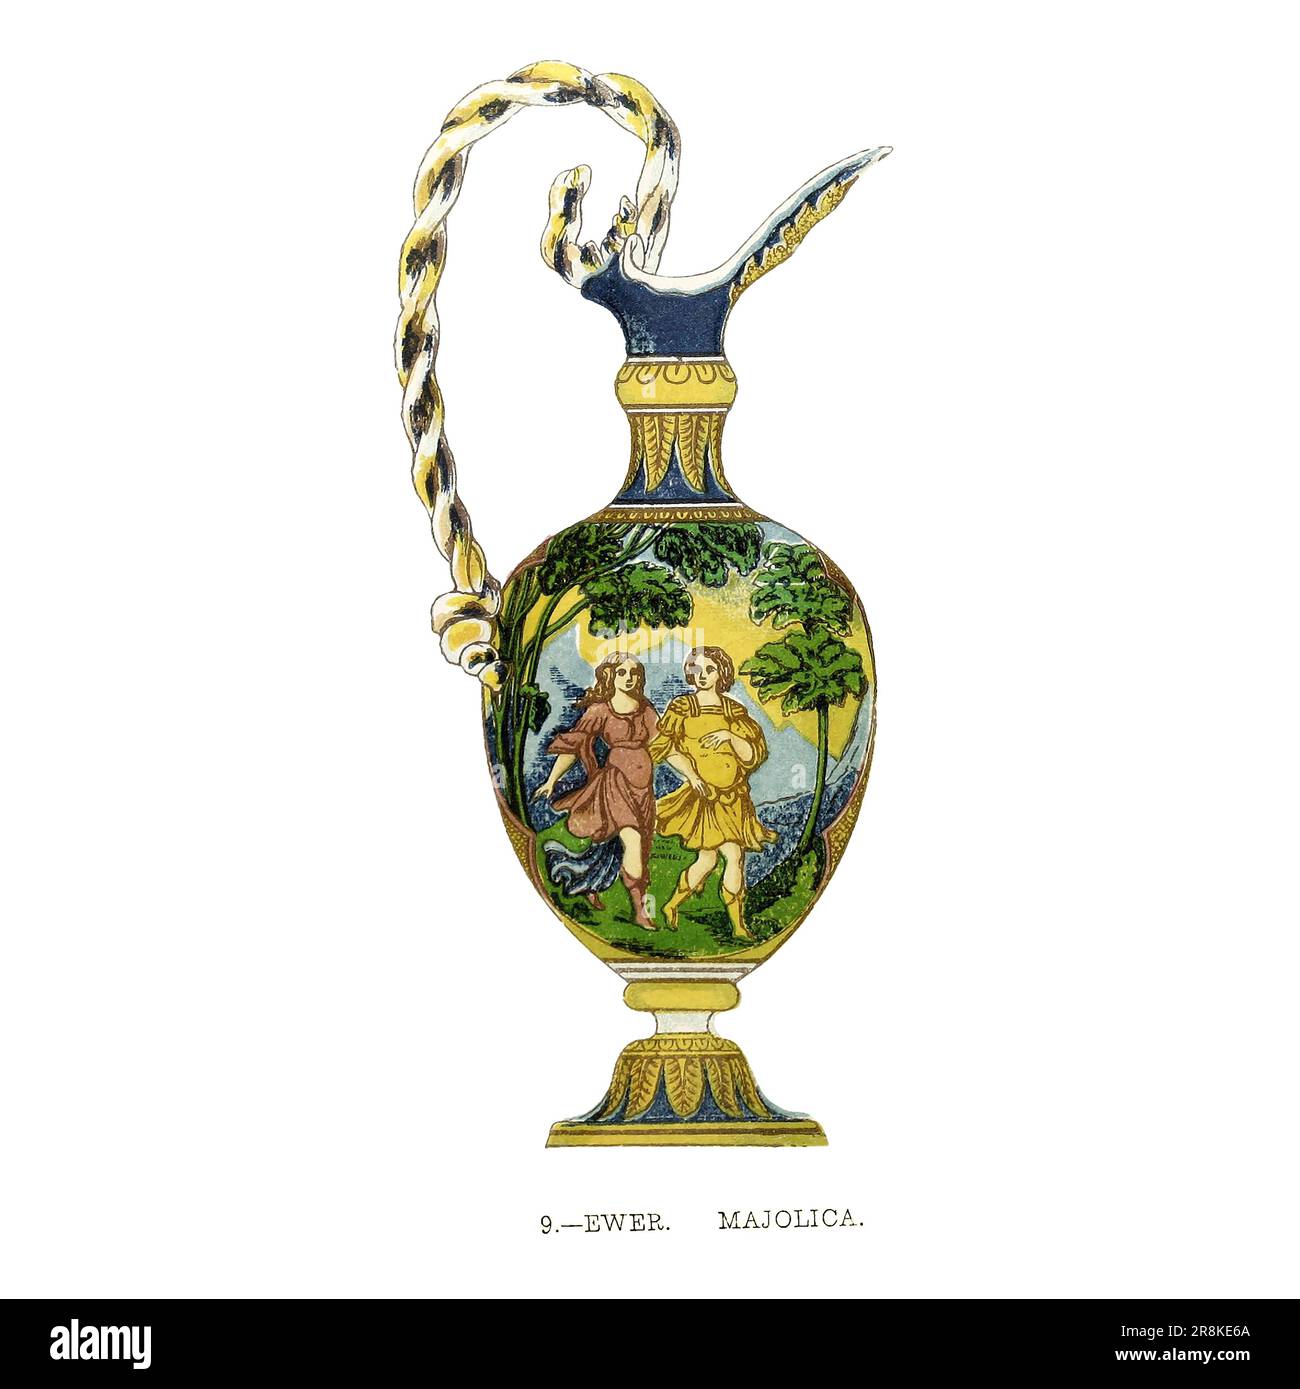 EWER MAJOLICA from the book ' A history of pottery and porcelain, mediaeval and modern ' by Joseph Marryat, Published in London by John Murray, Albemarle Street in 1857 Stock Photo